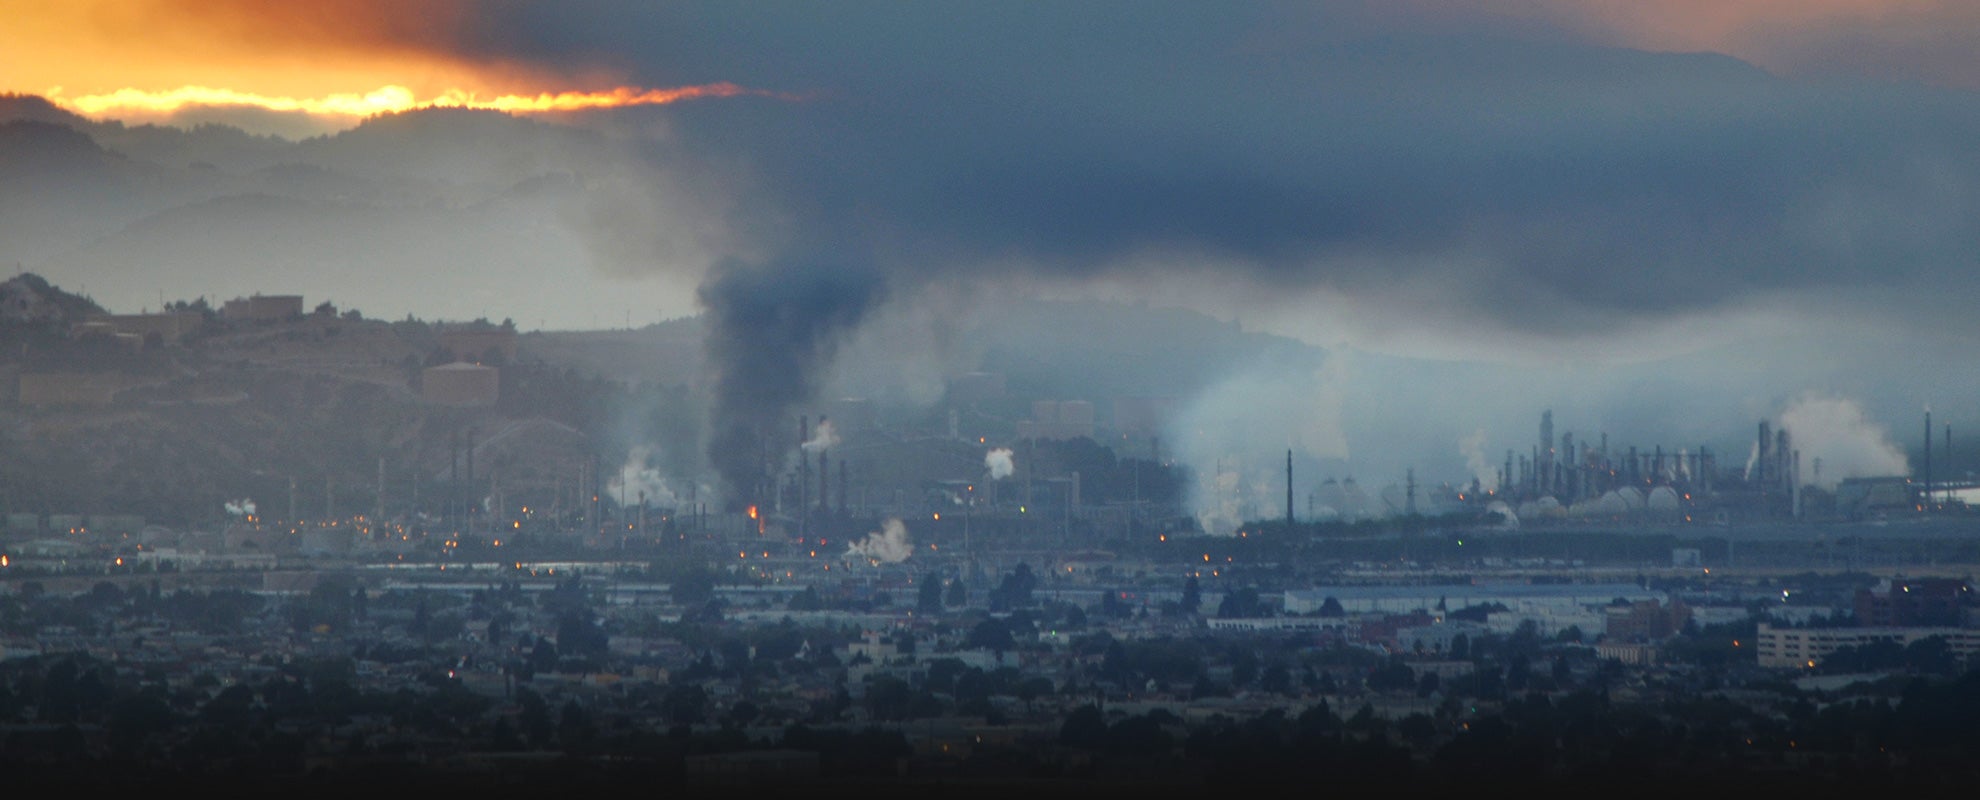 A large fire at Chevron&#039;s refinery in Richmond, California, on August 6, 2012.